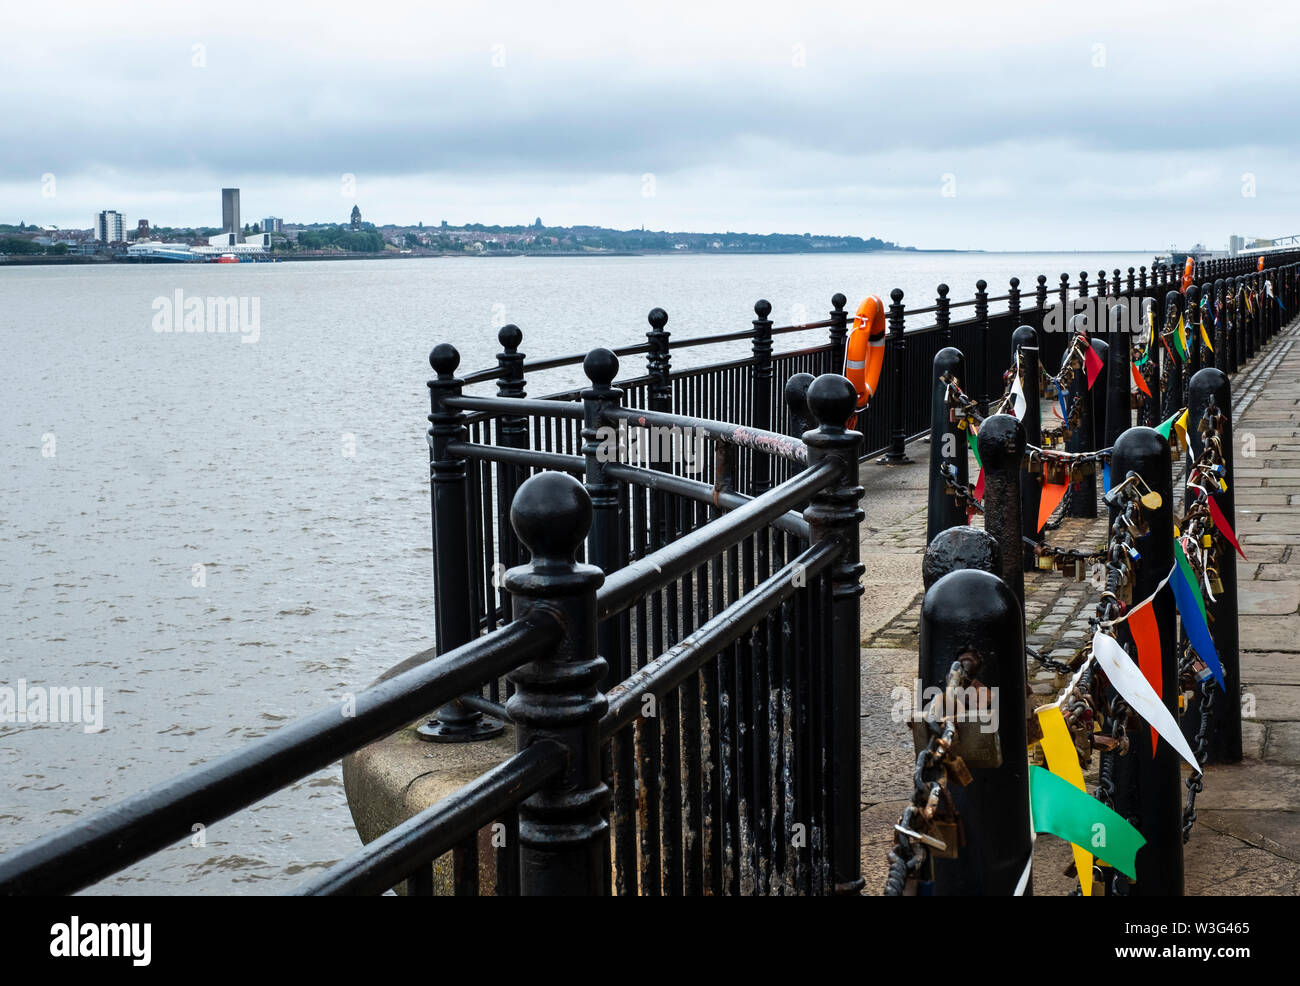 Thousands of love locks attached to the metal promenade barriers next to the river Mersey at the Royal Albert Dock, Liverpool, UK Stock Photo